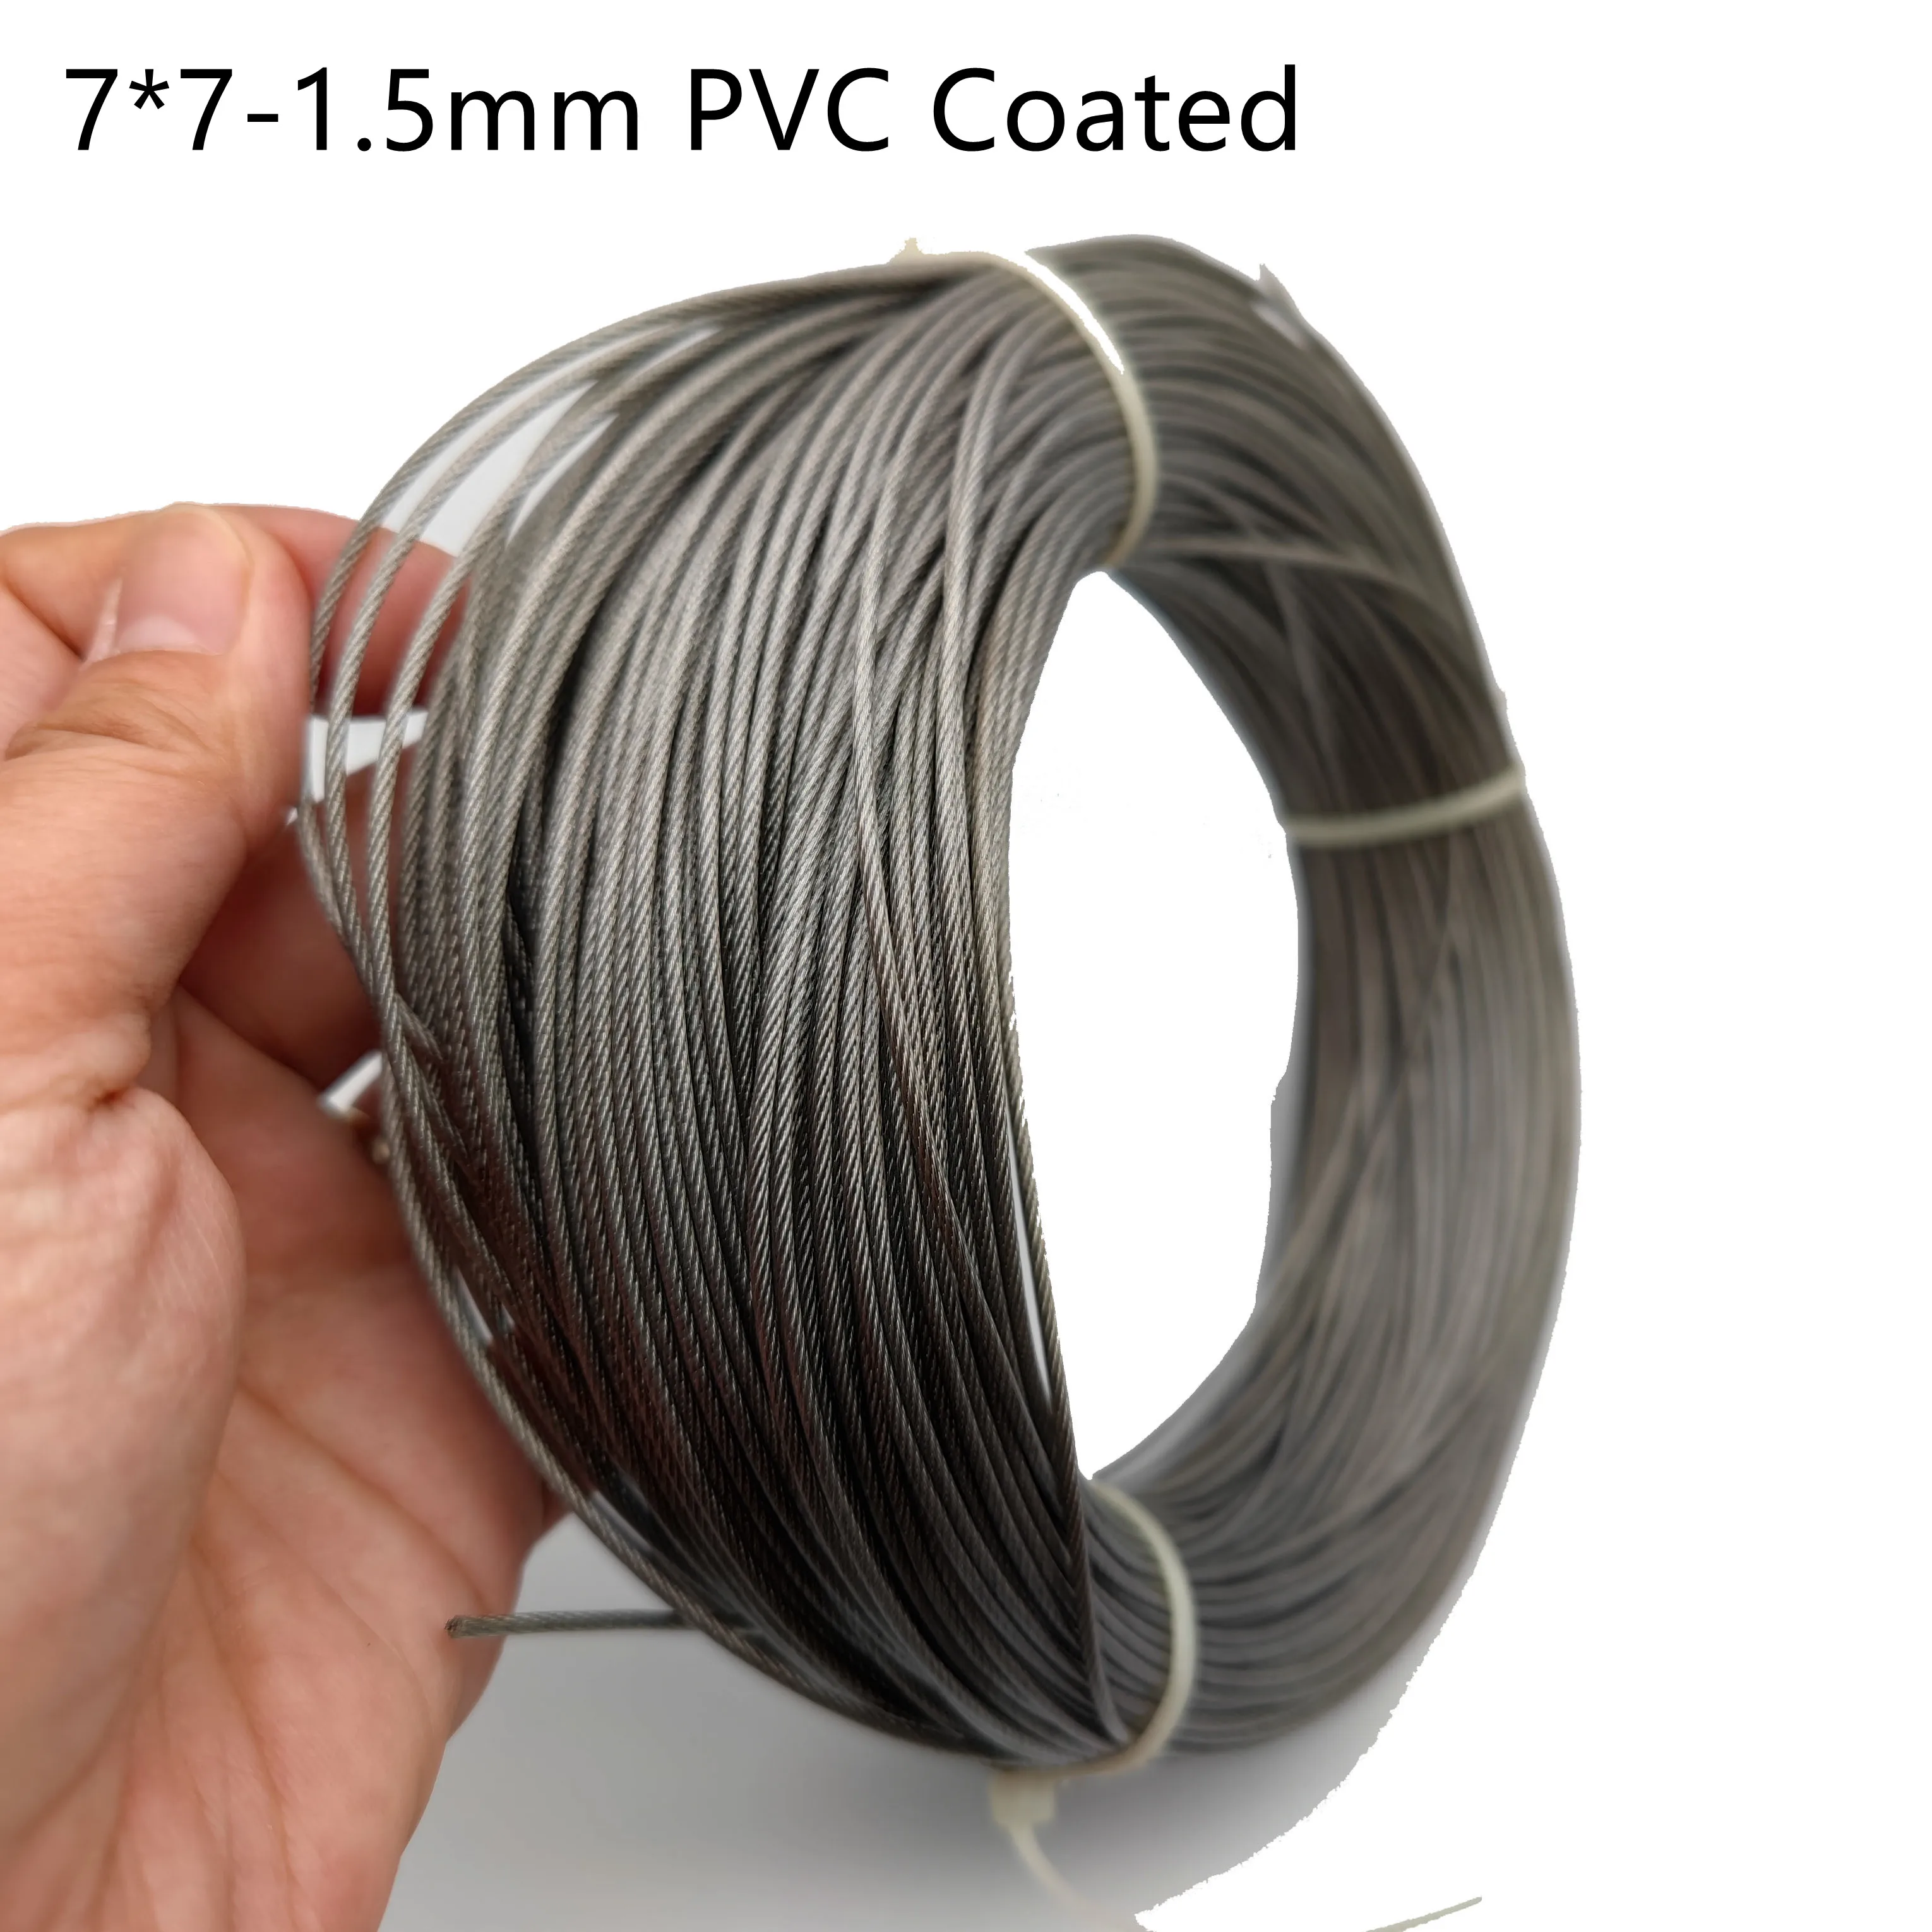 PVC Coating 50M/100M 1.2mm/1.5mm 7X7 Construction 304 Stainless steel Wire rope  Softer Fishing Lifting Cable